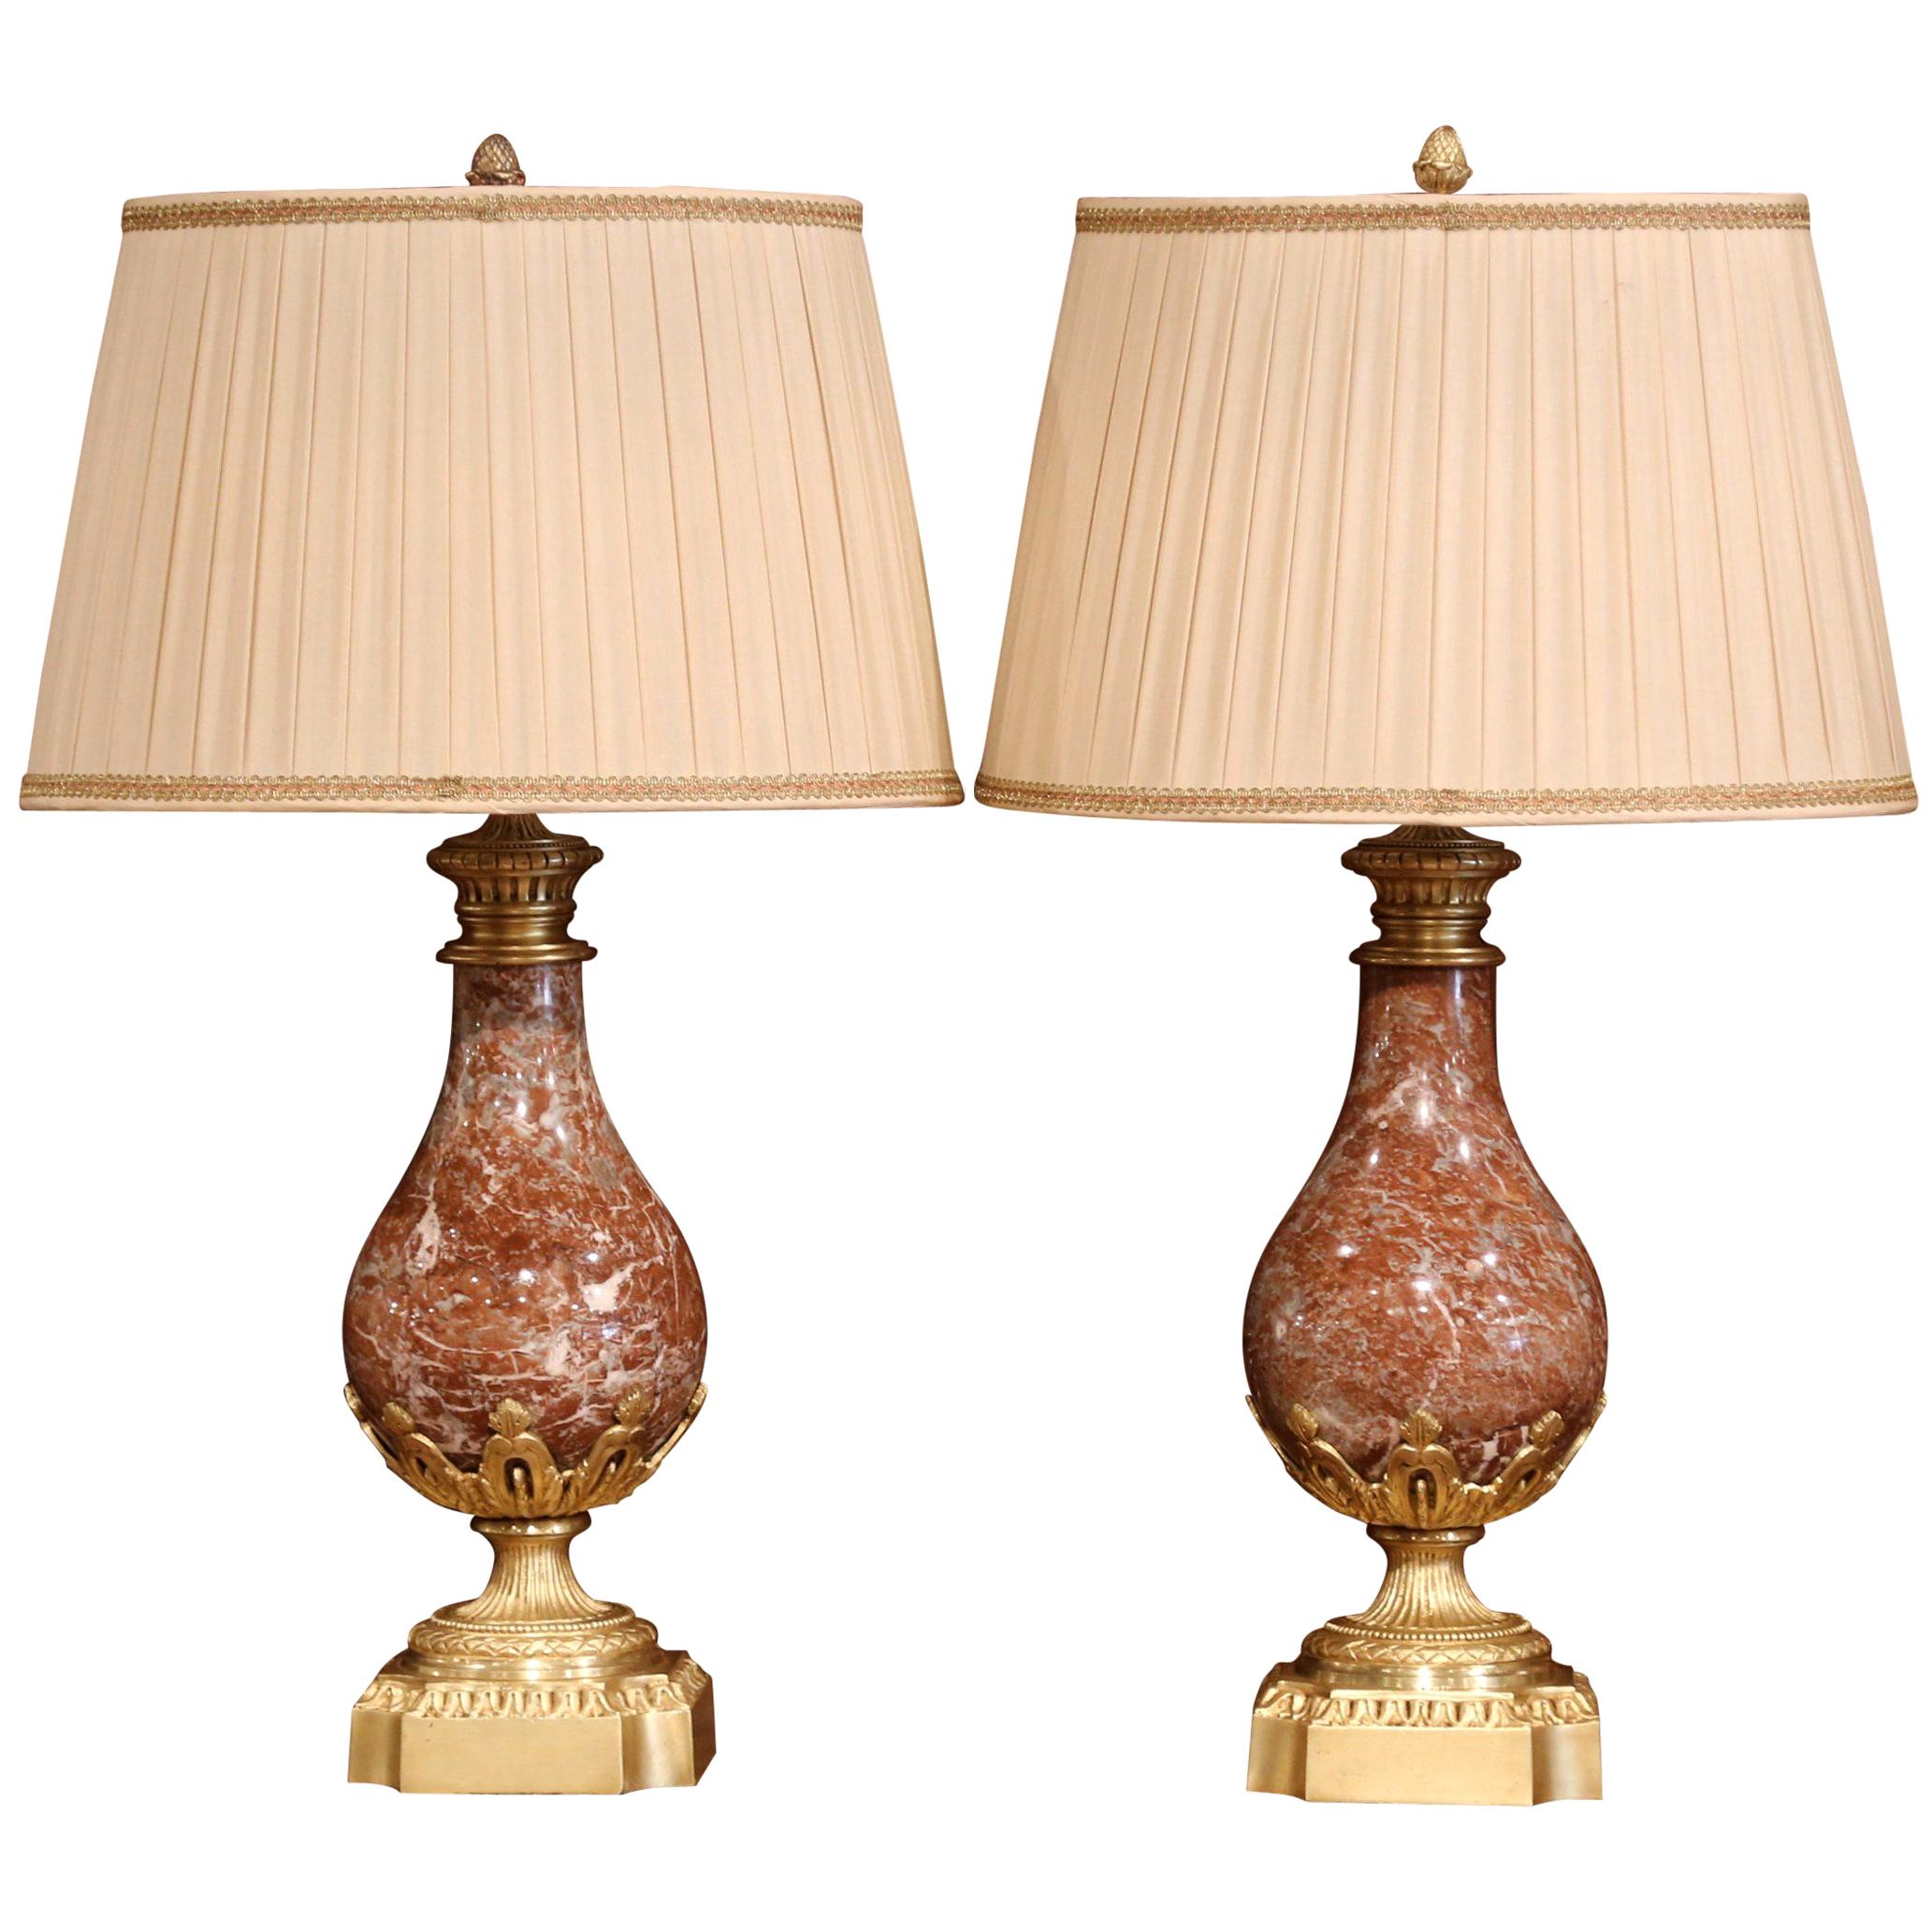 Pair of 19th Century French Red Marble and Bronze Urns Converted as Table Lamps